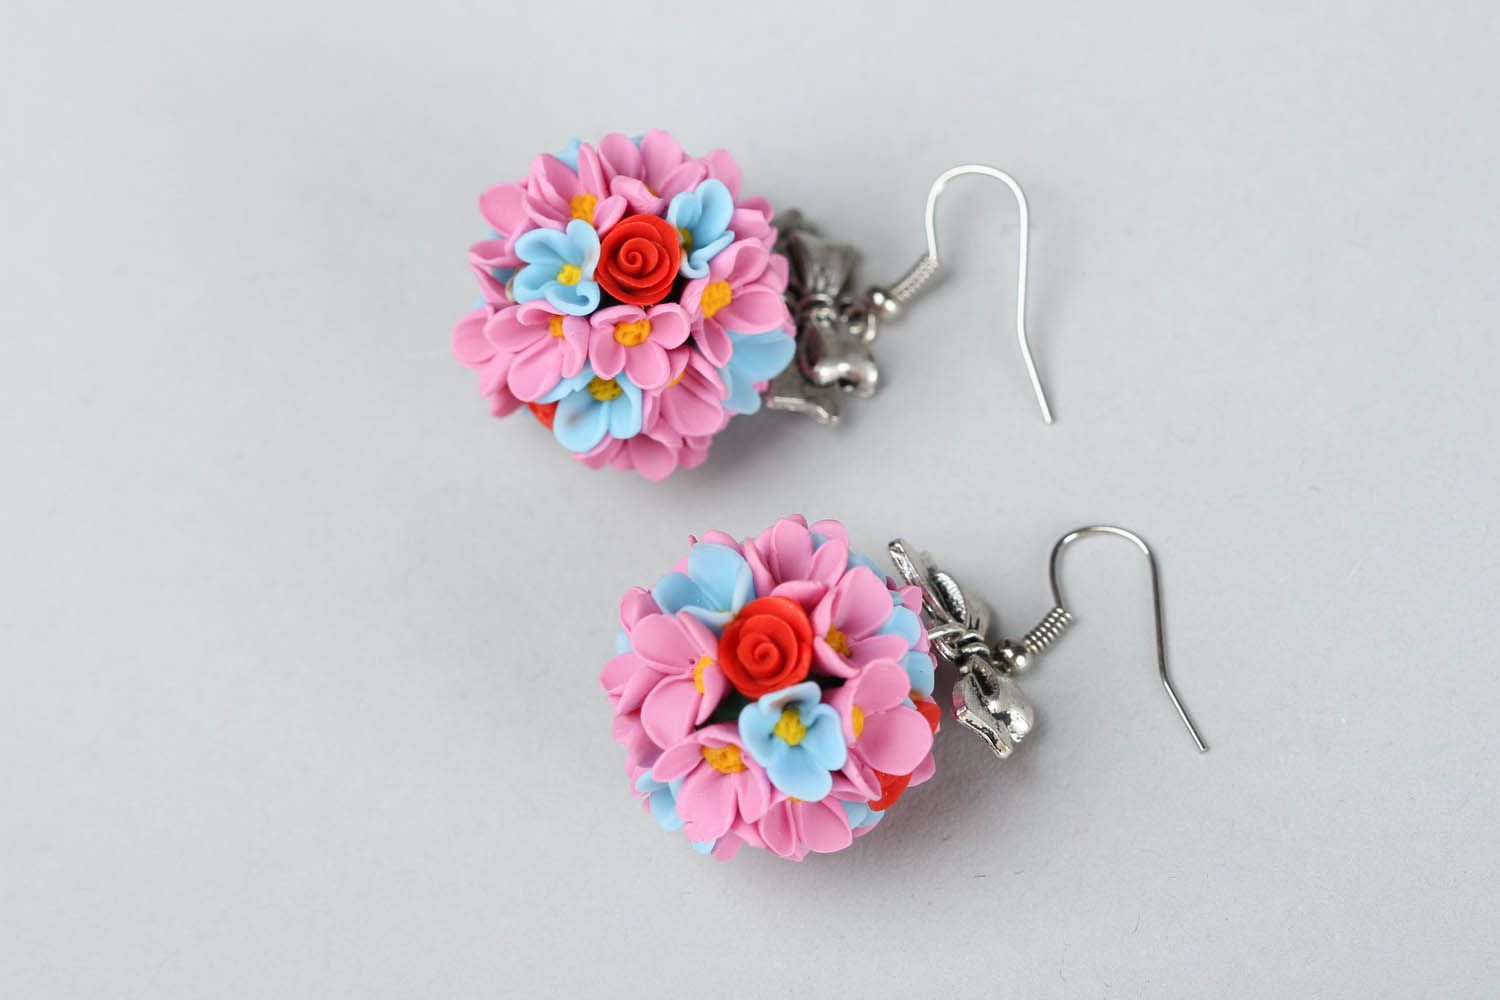 Earrings with flowers made of polymer clay photo 2